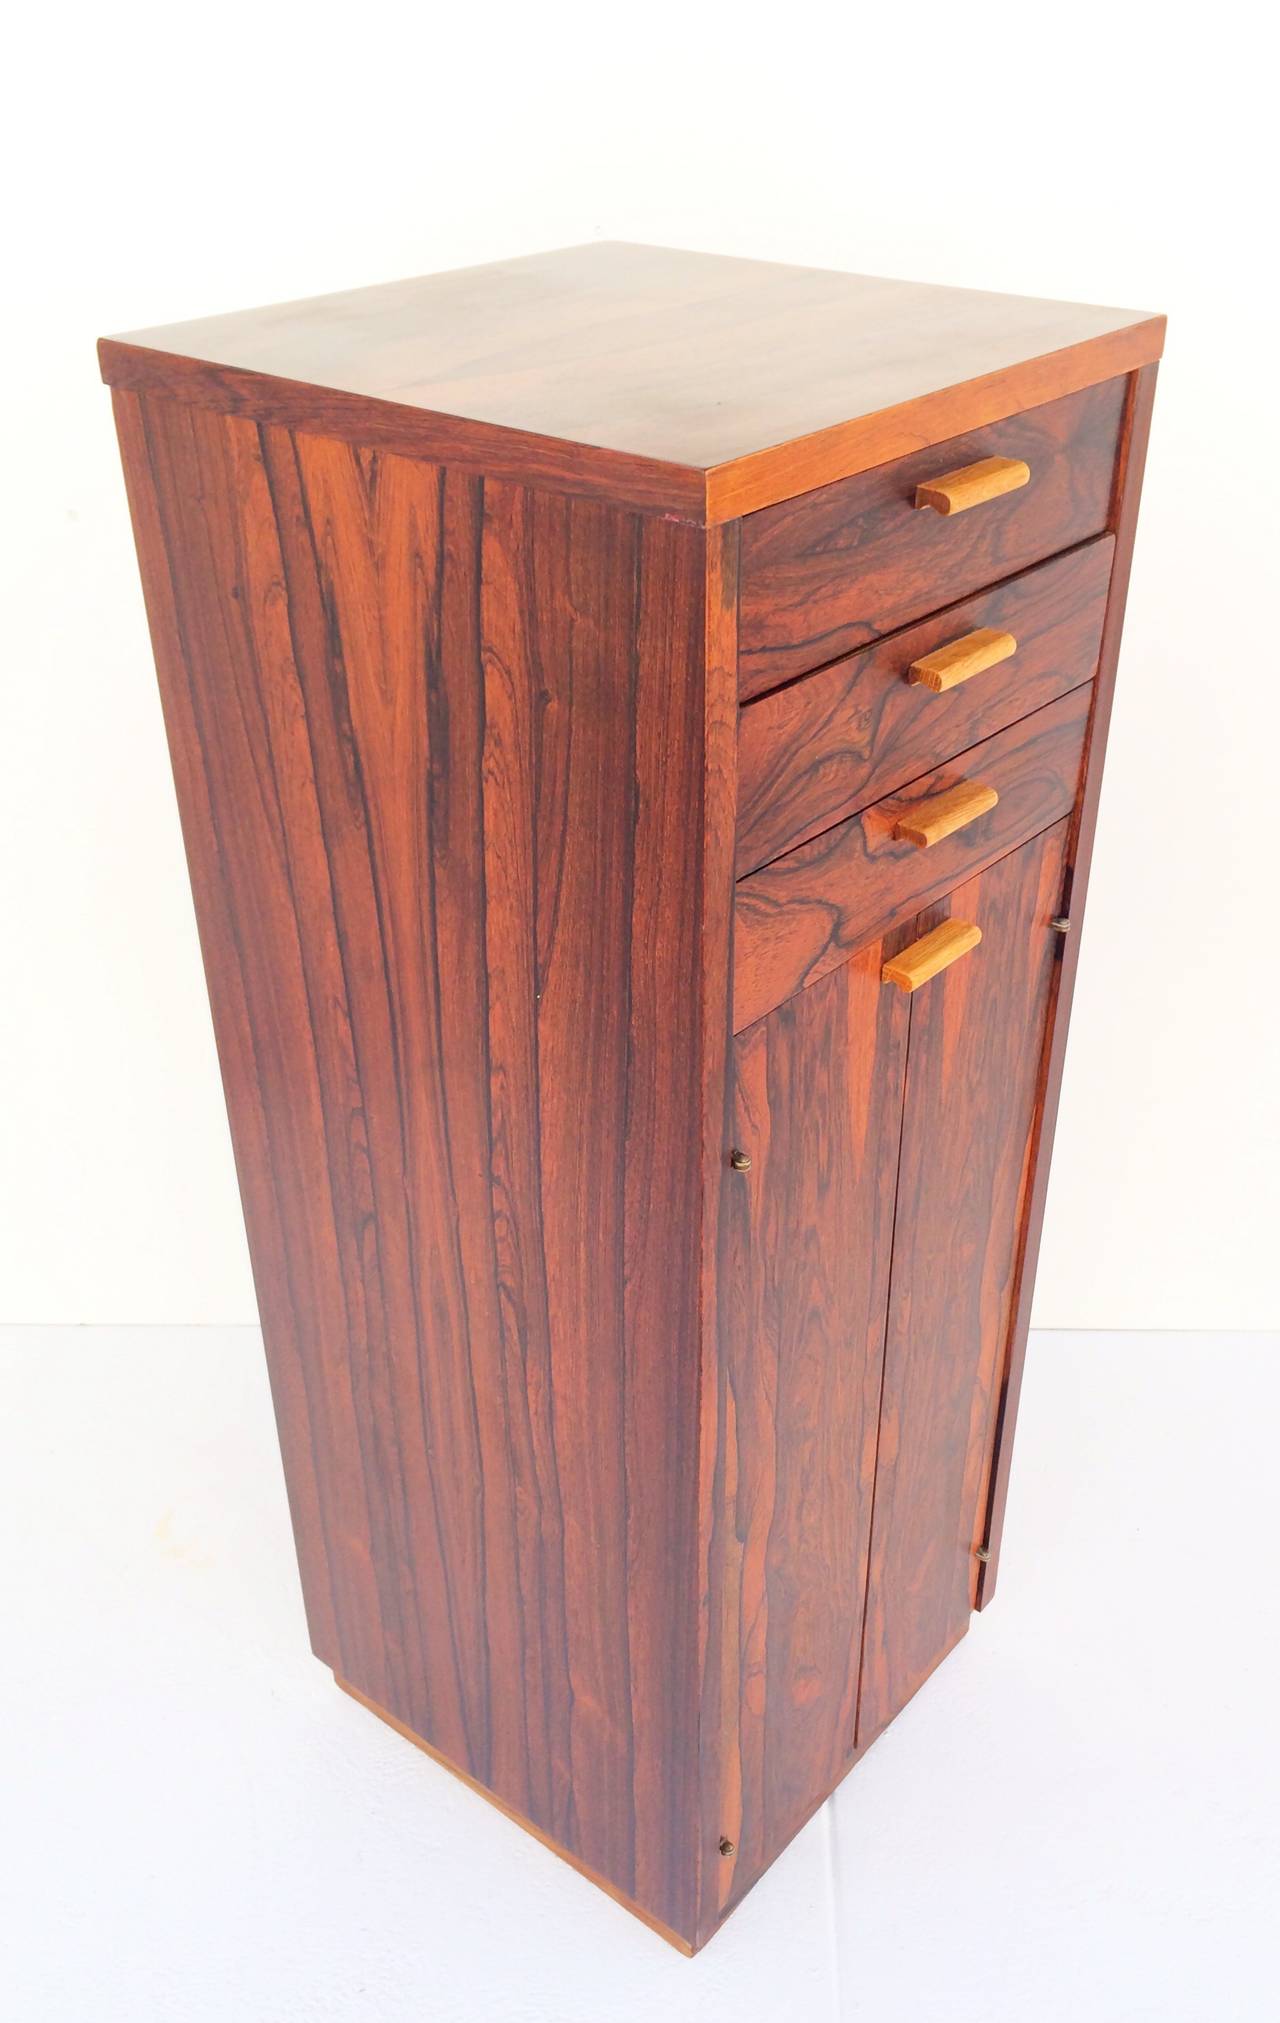 A stunning small-scale rosewood gentleman's chest. 
This chest has three drawers at the top with double doors below that open to reveal an adjustable shelf and a finished rosewood interior.
This piece has a finished rosewood back, making placement